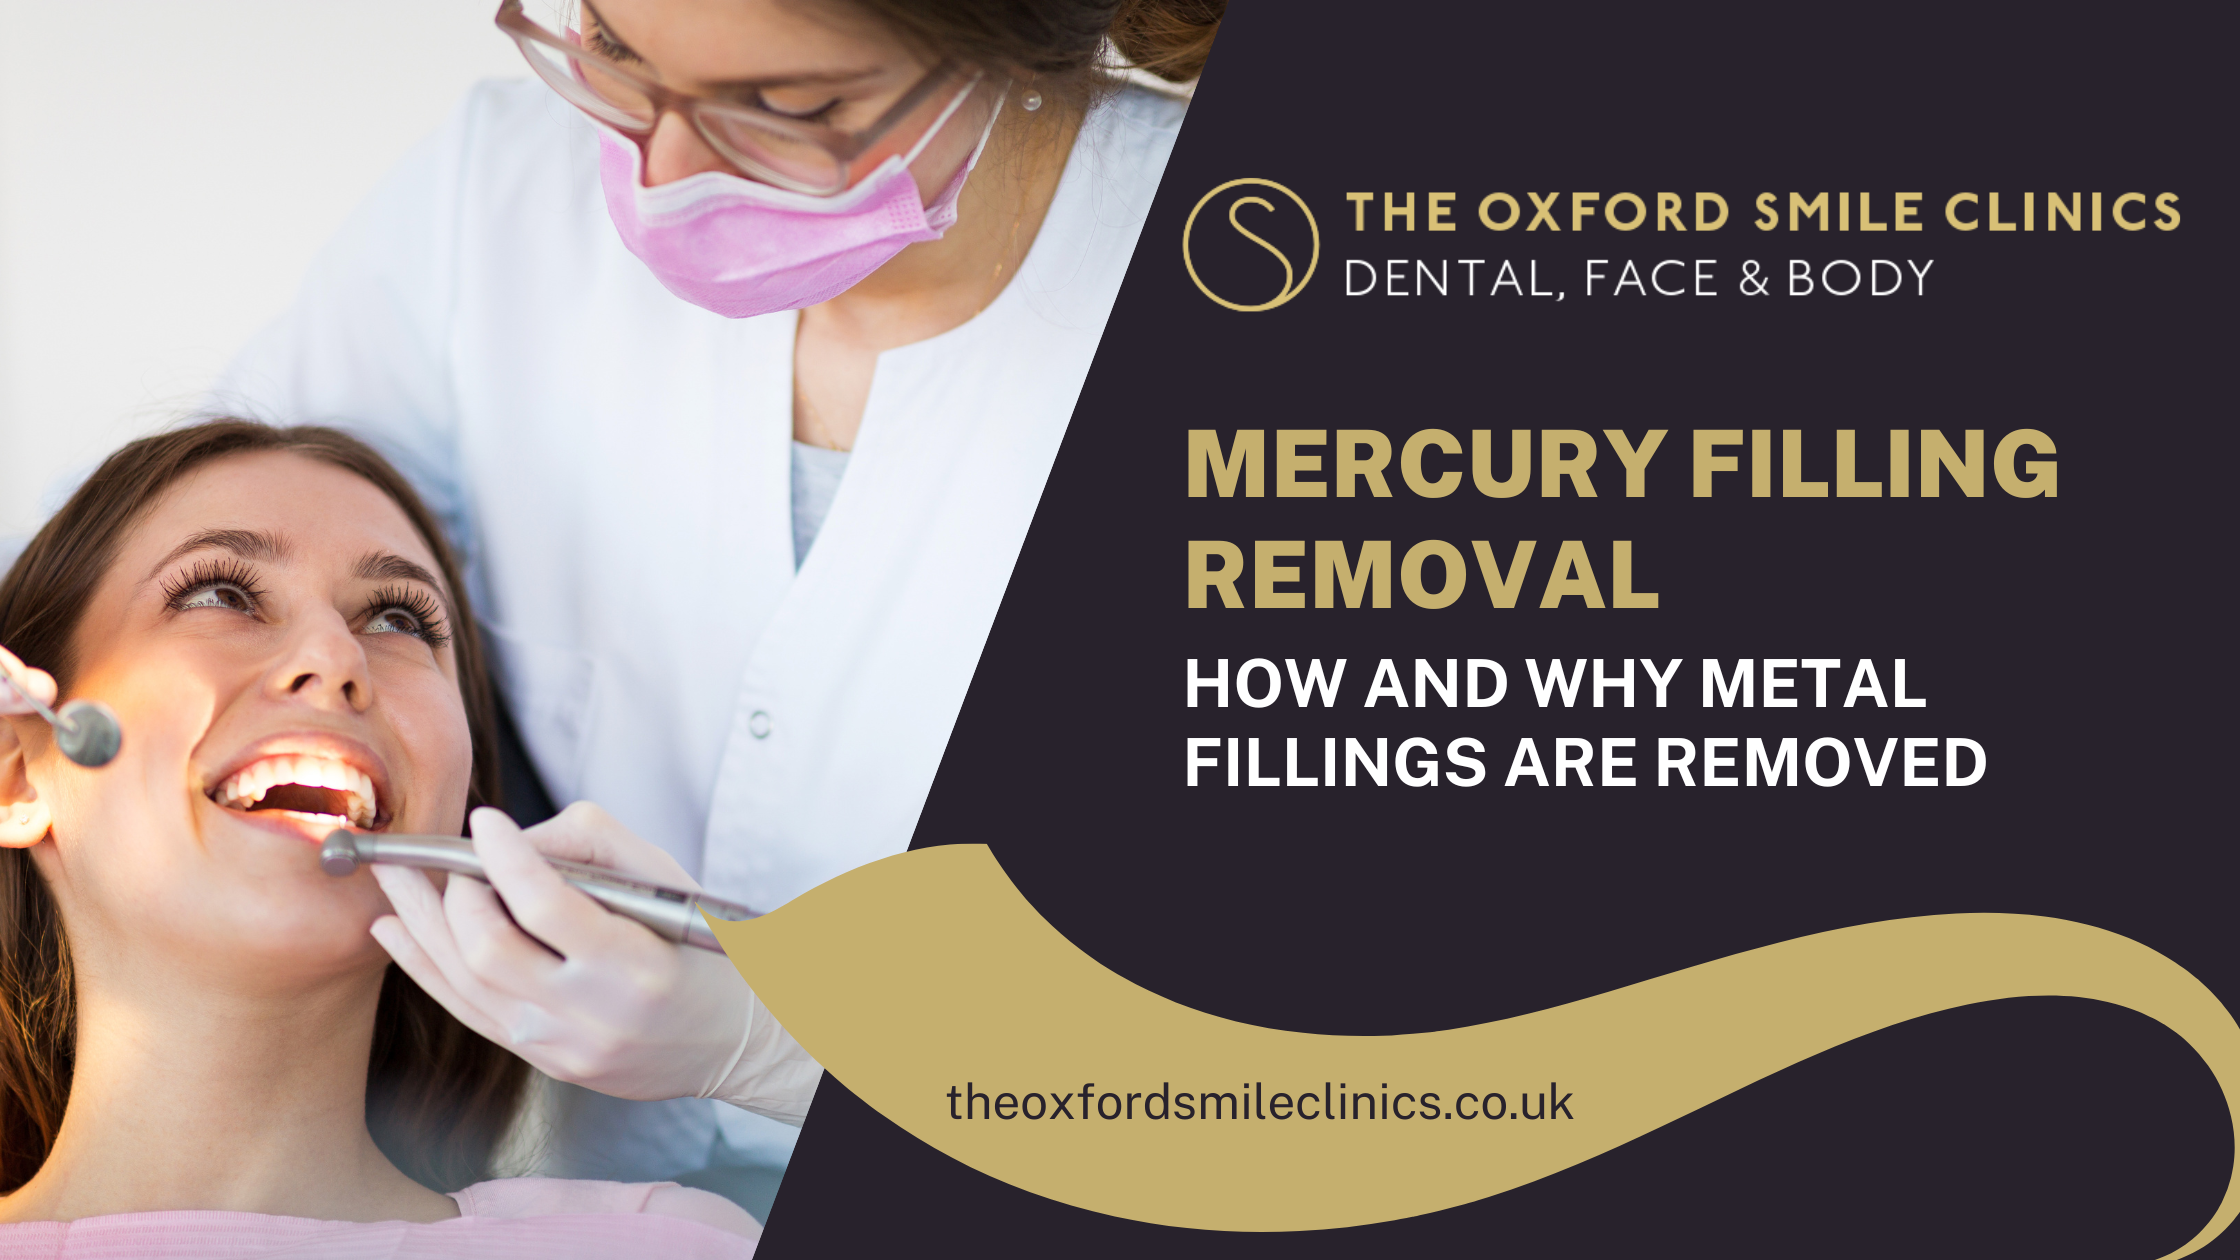 Mercury Filling Removal - How And Why Metal Fillings Are Removed